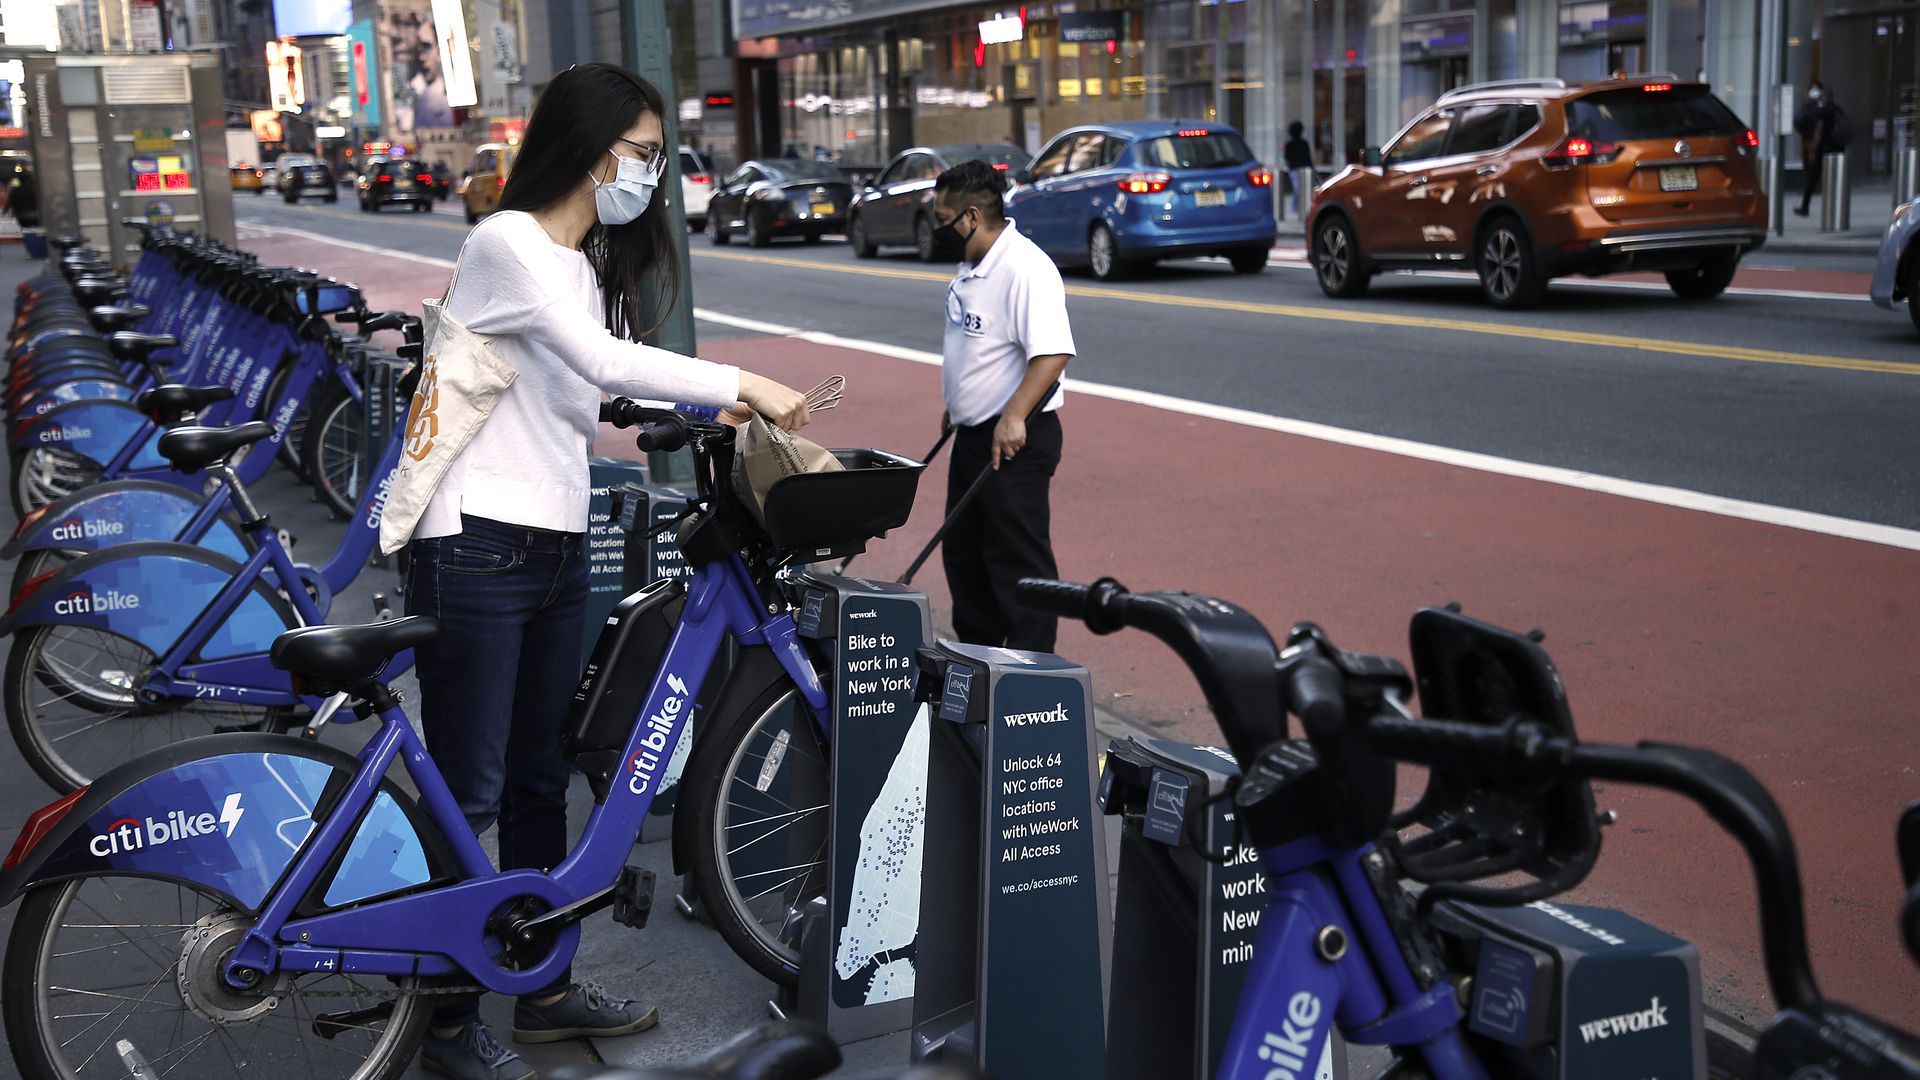 A woman rents a bike at a streetside Citibike parking location.